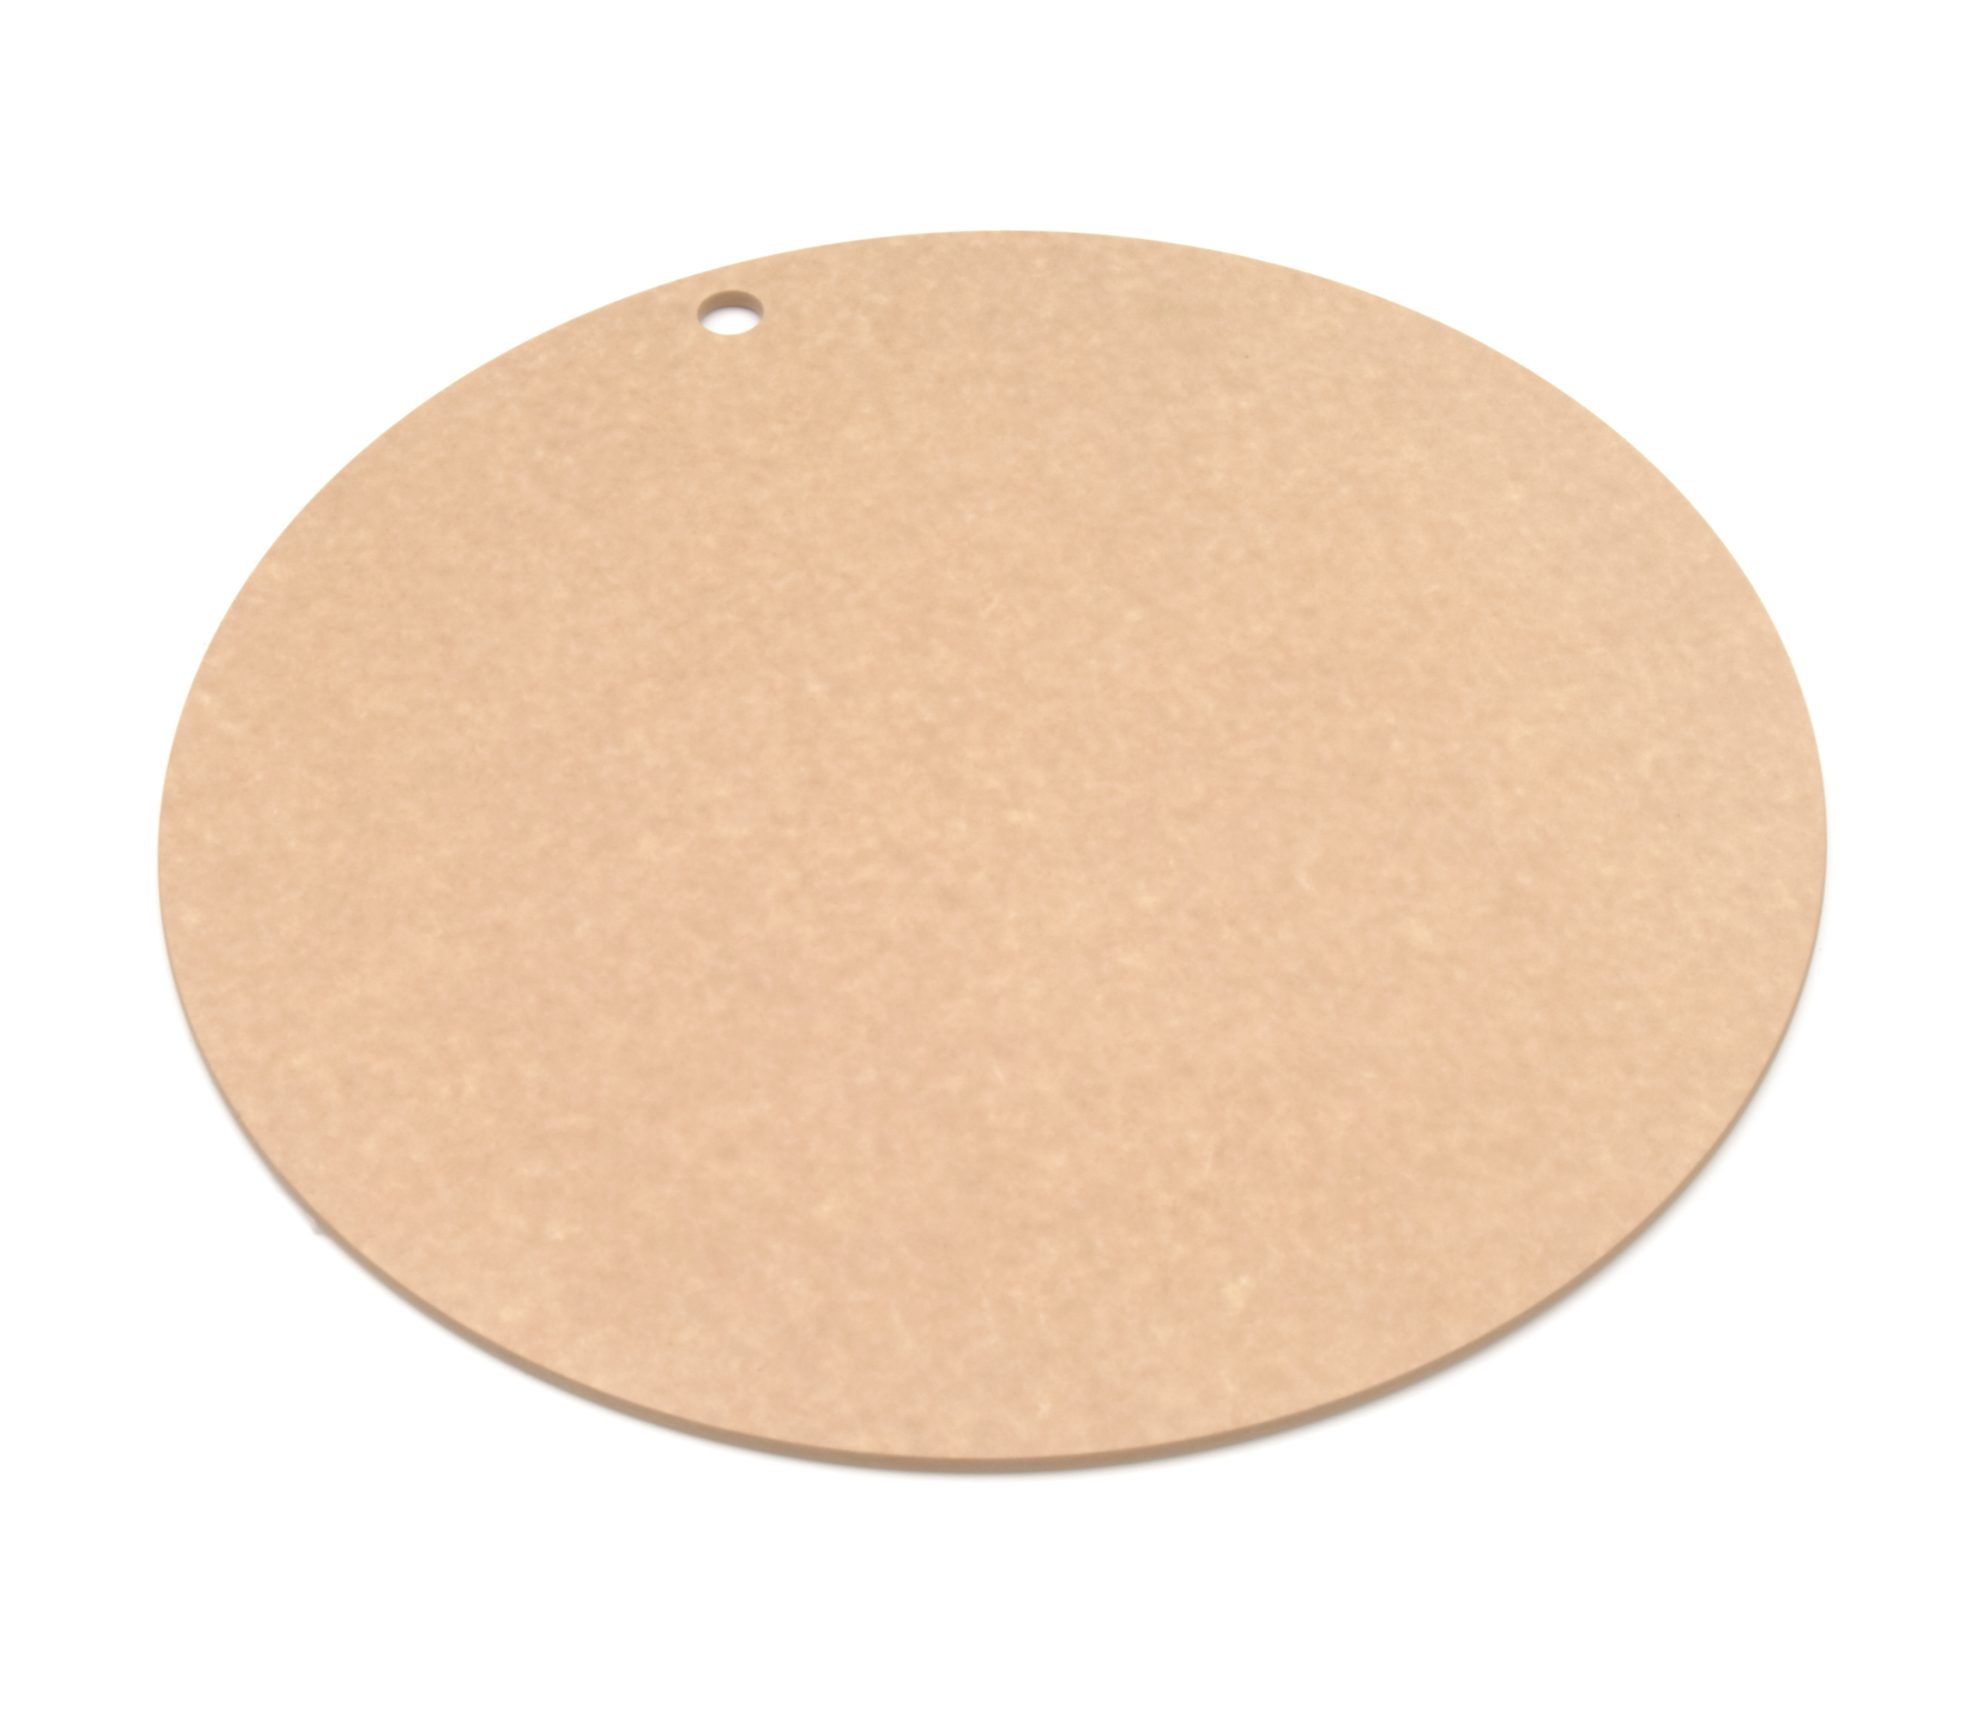 pizza board-commercial-natural-18×18-429001801